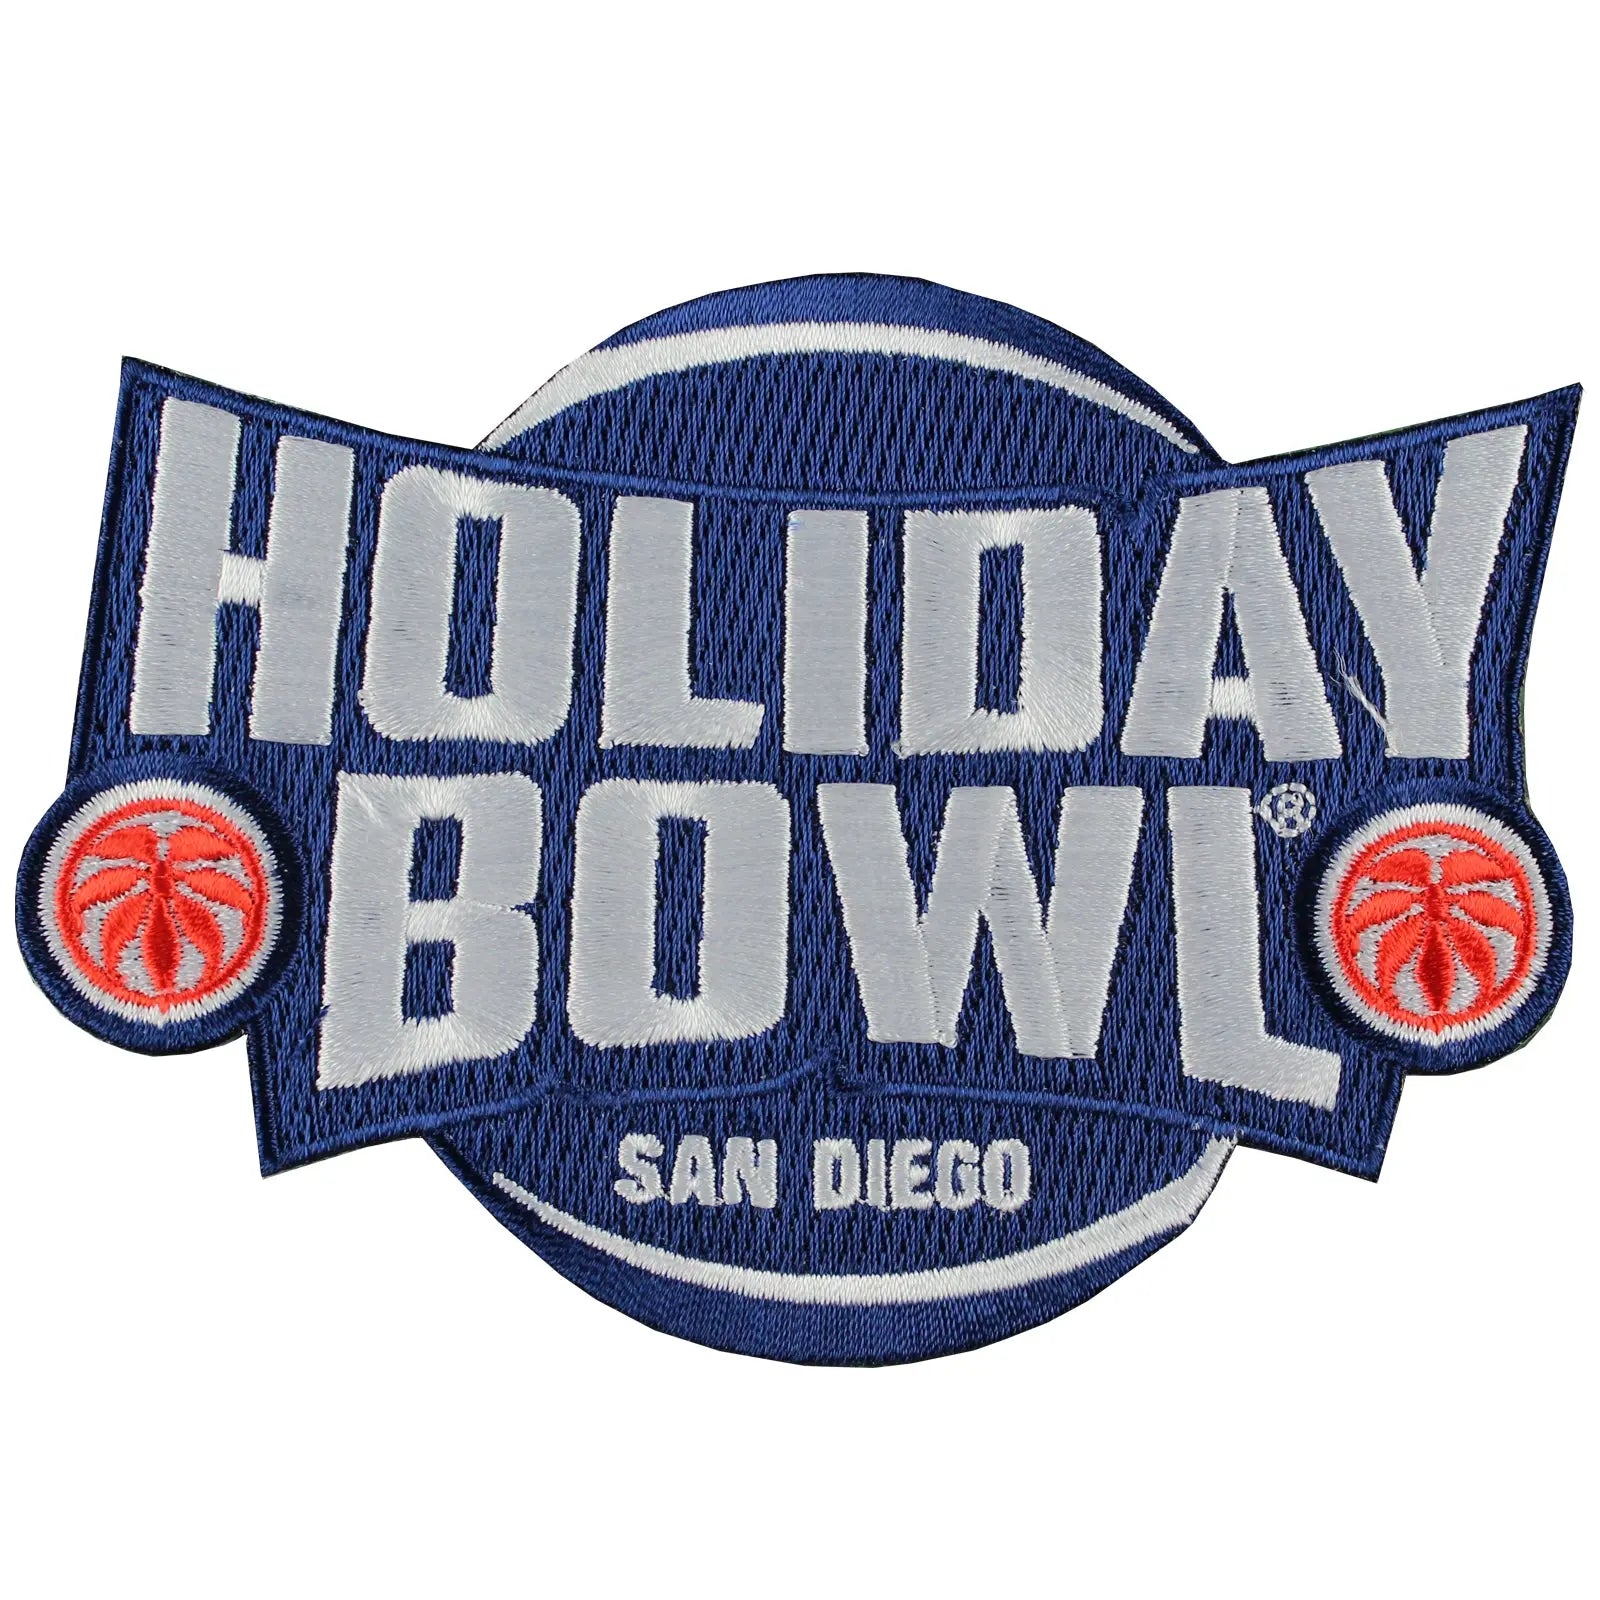 Holiday Bowl San Diego Jersey Game Patch Wisconsin vs. USC (2015) 